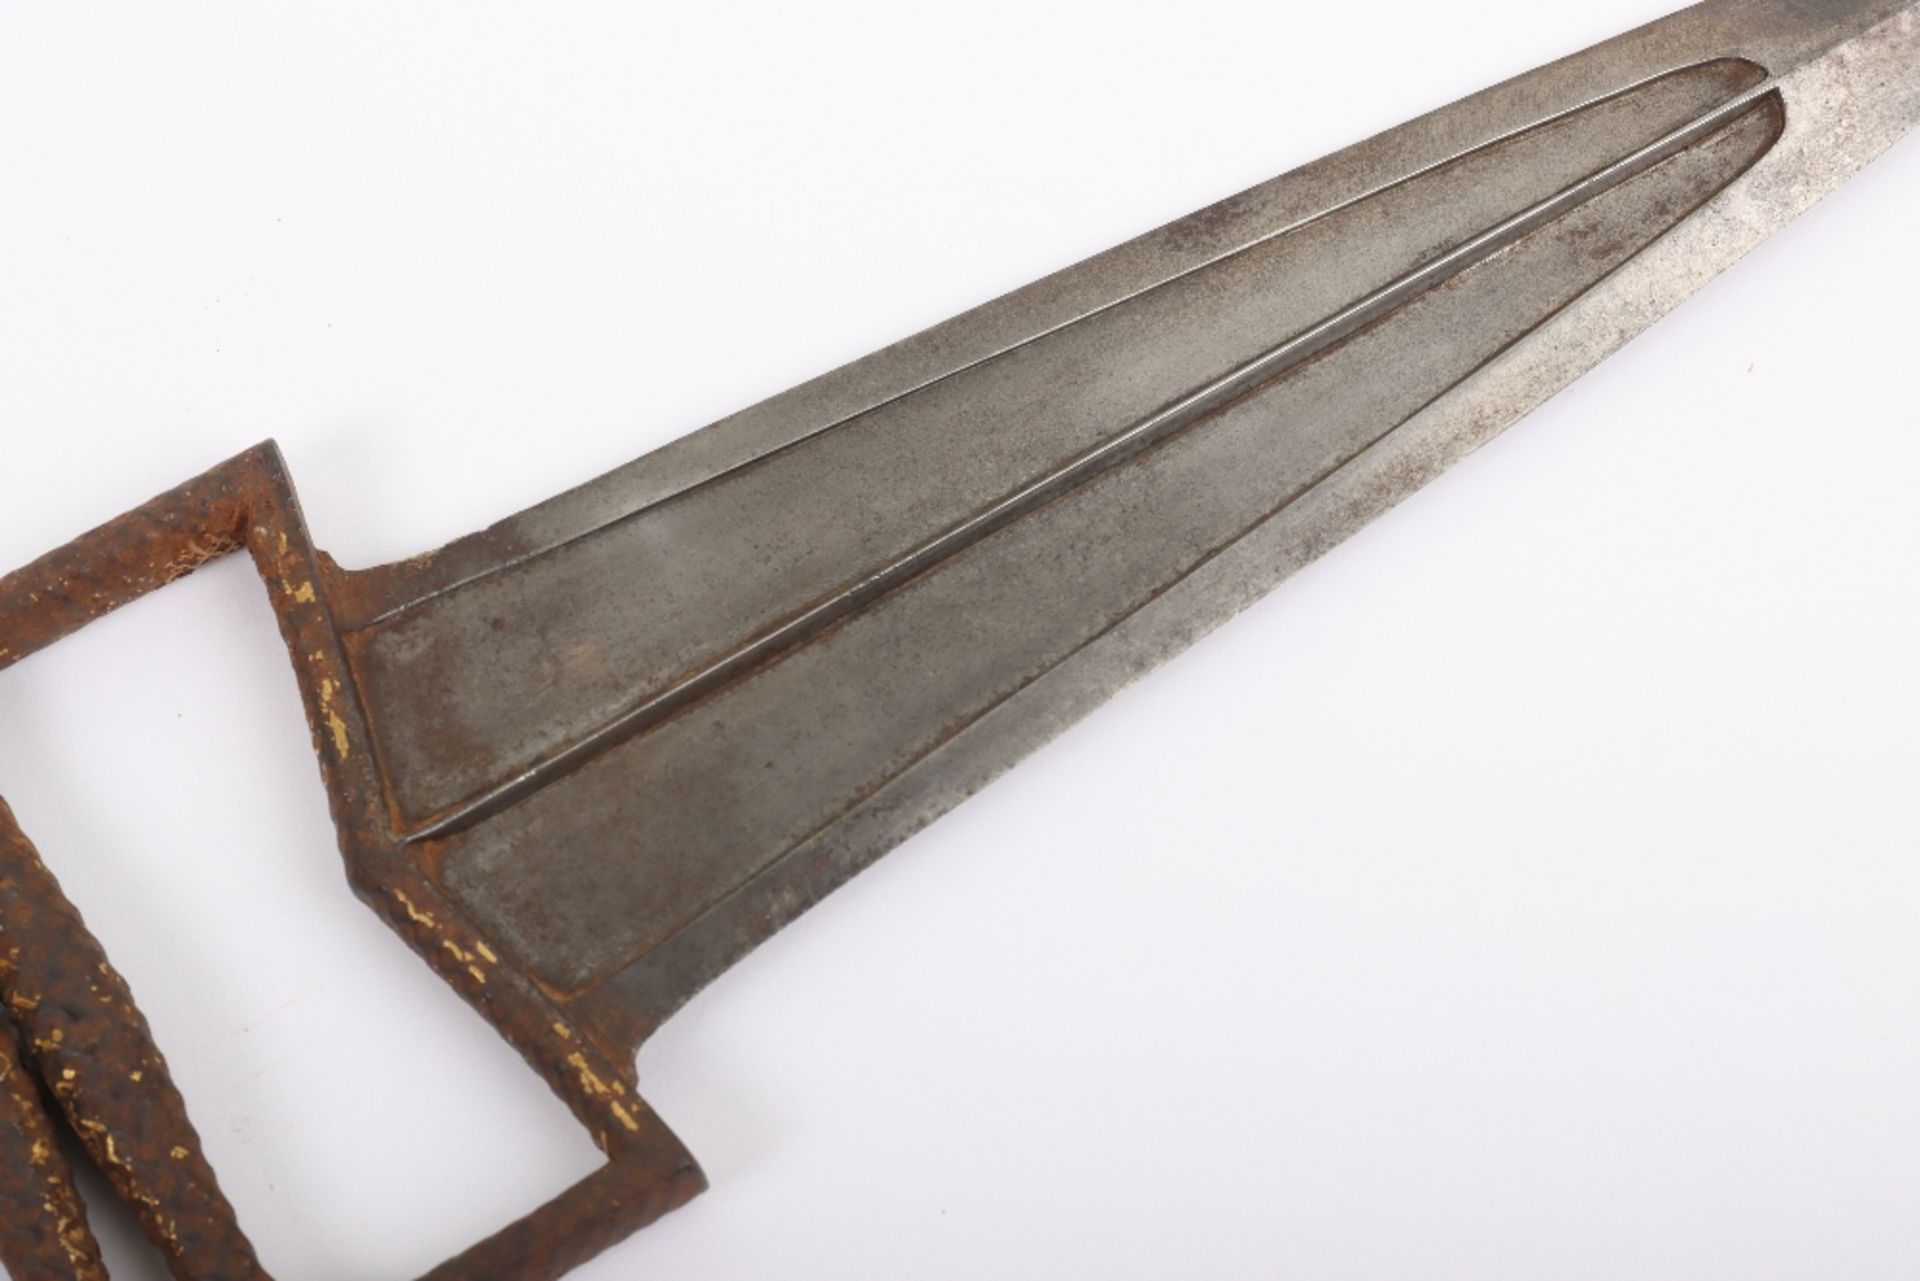 Indian Dagger Katar from Rajathan, Probably 17th or Early 18th Century - Image 7 of 8